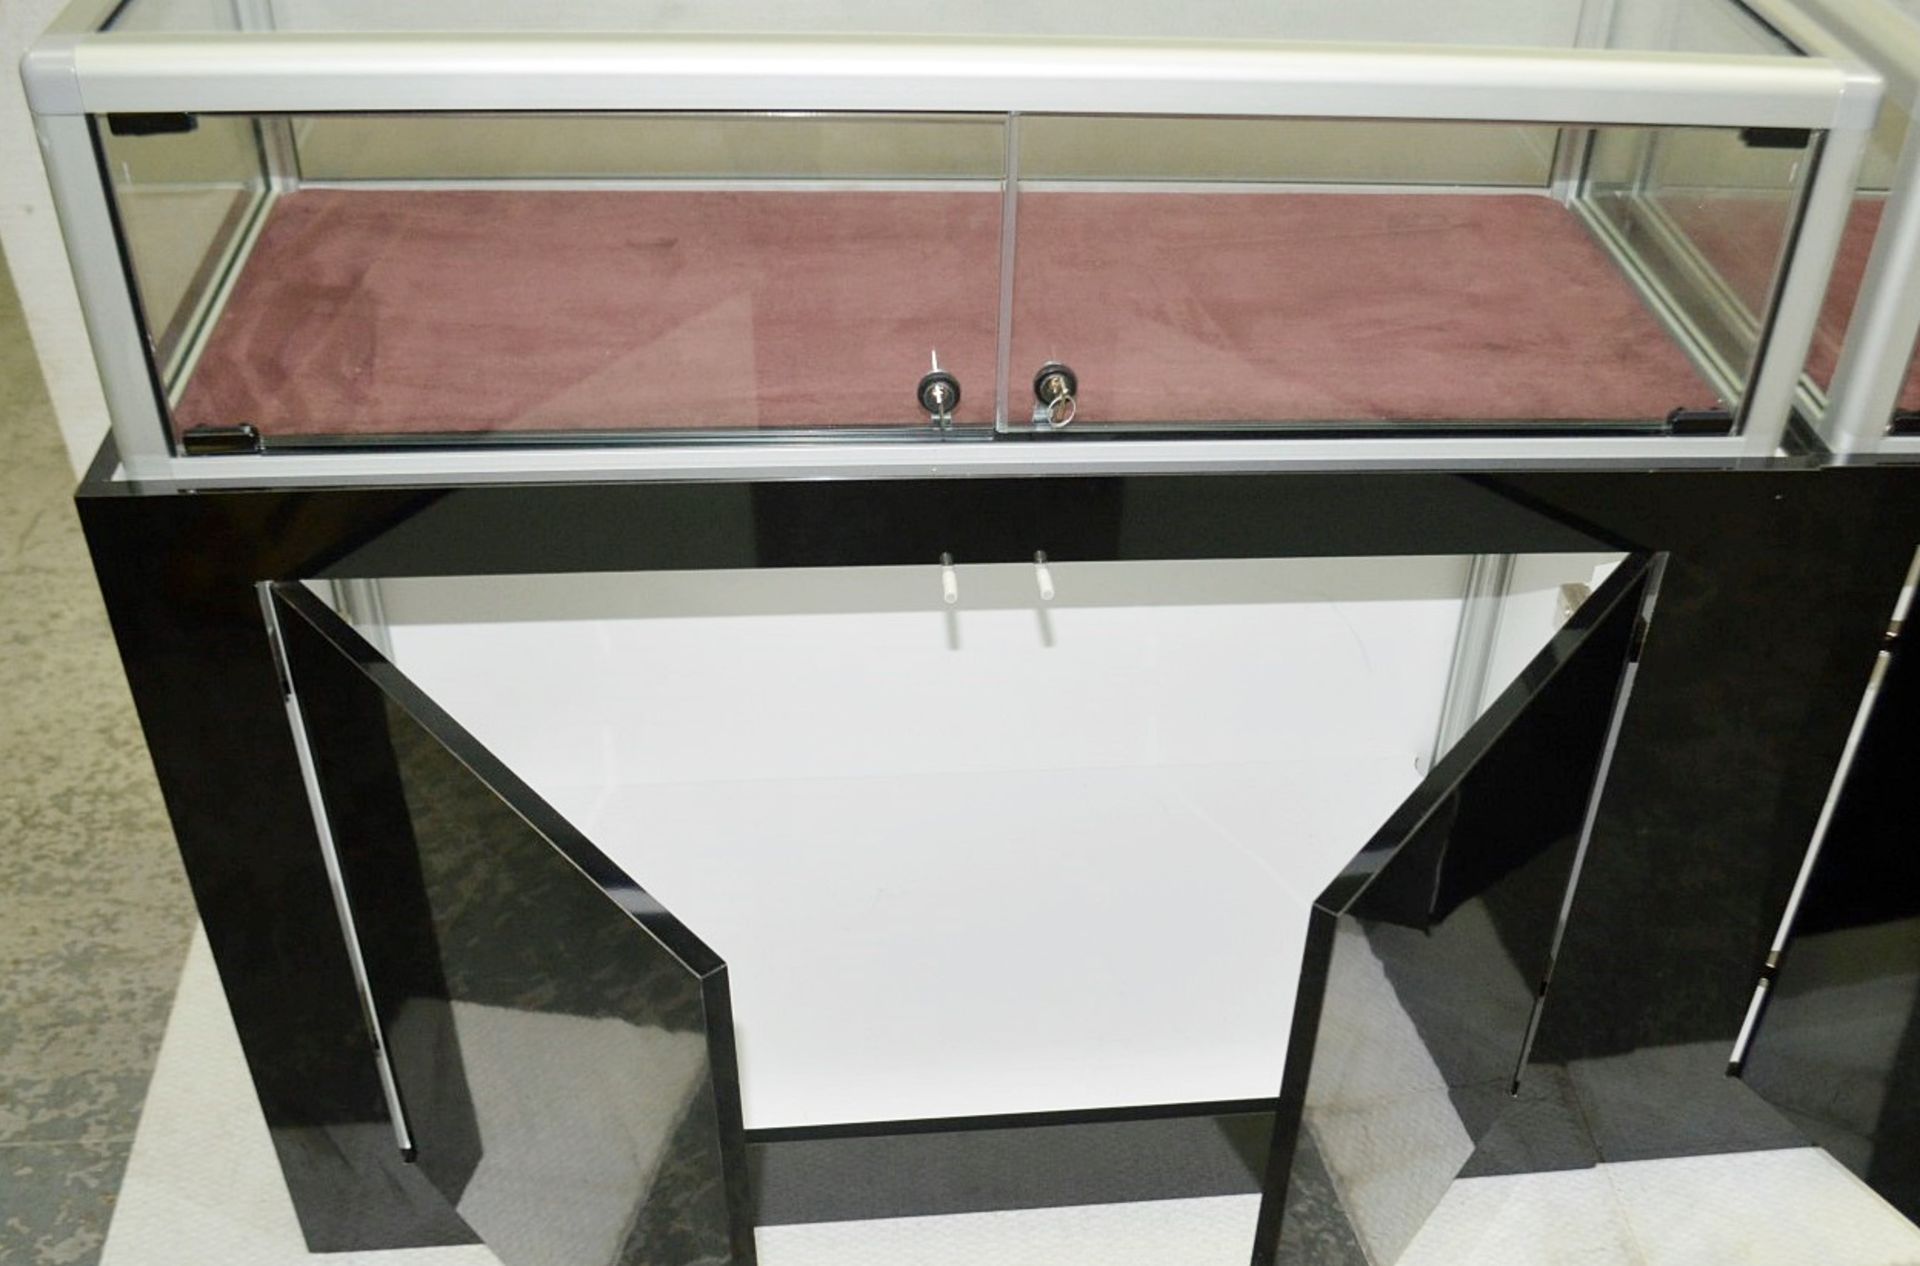 Pair Of Retail Counters With Lockable Display Cabinets And Undercounter Storage - Image 7 of 9